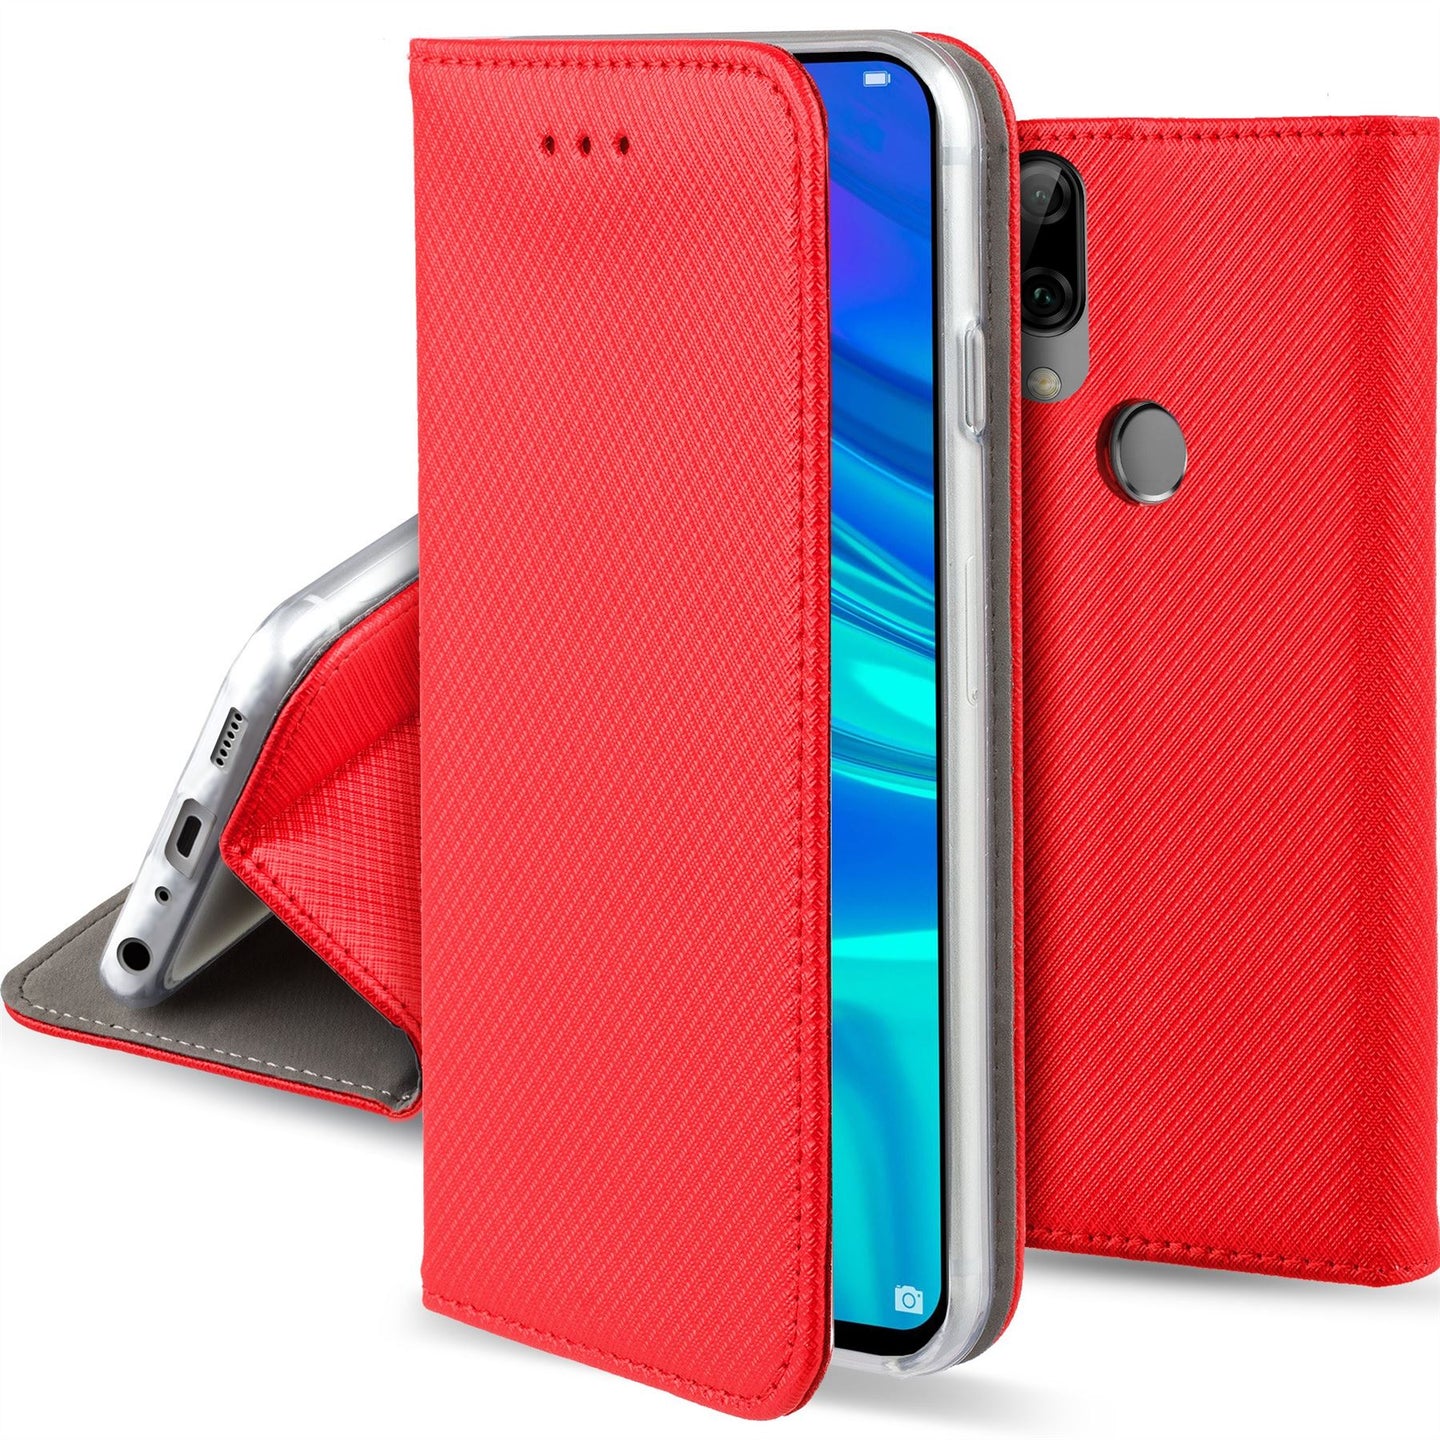 Moozy Case Flip Cover for Huawei P Smart 2019, Honor 10 Lite, Red - Smart Magnetic Flip Case with Card Holder and Stand